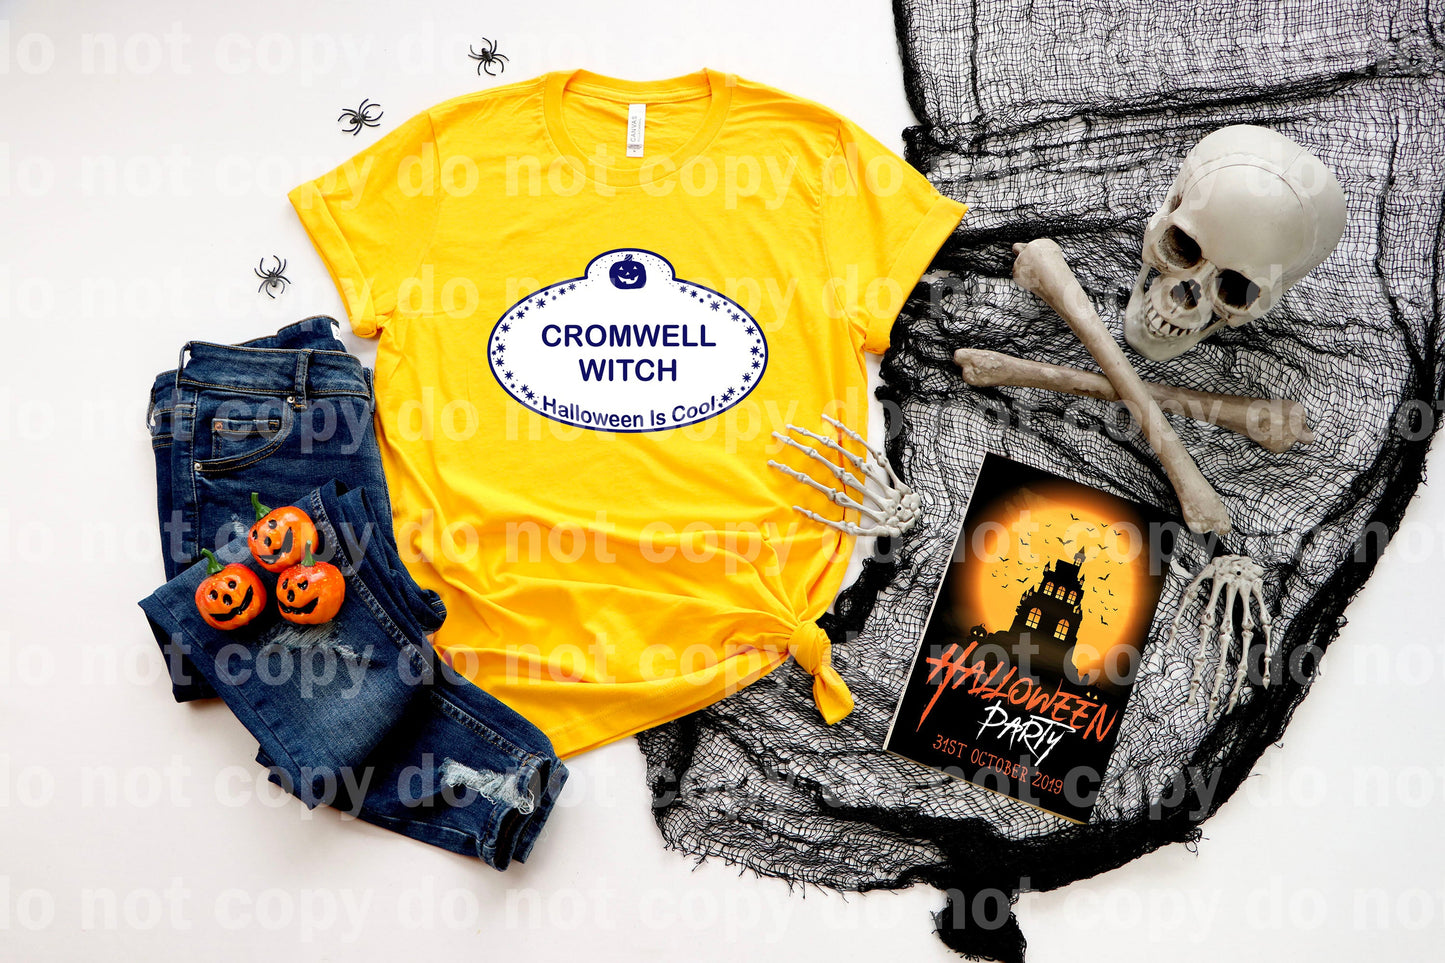 Cromwell Witch Halloween Is Cool Dream Print or Sublimation Print